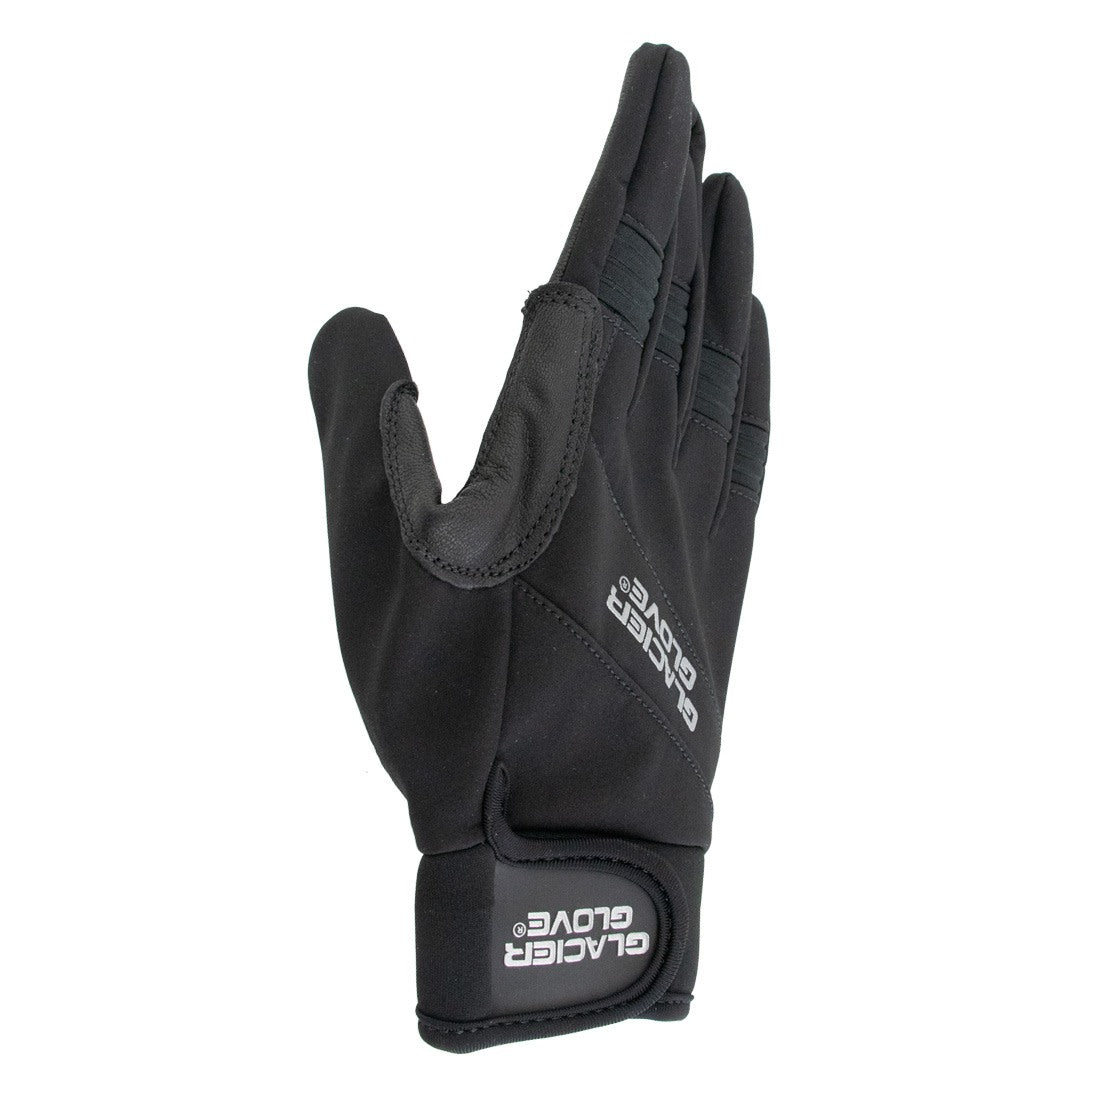 Glacier Glove Guide Gloves Thumb View